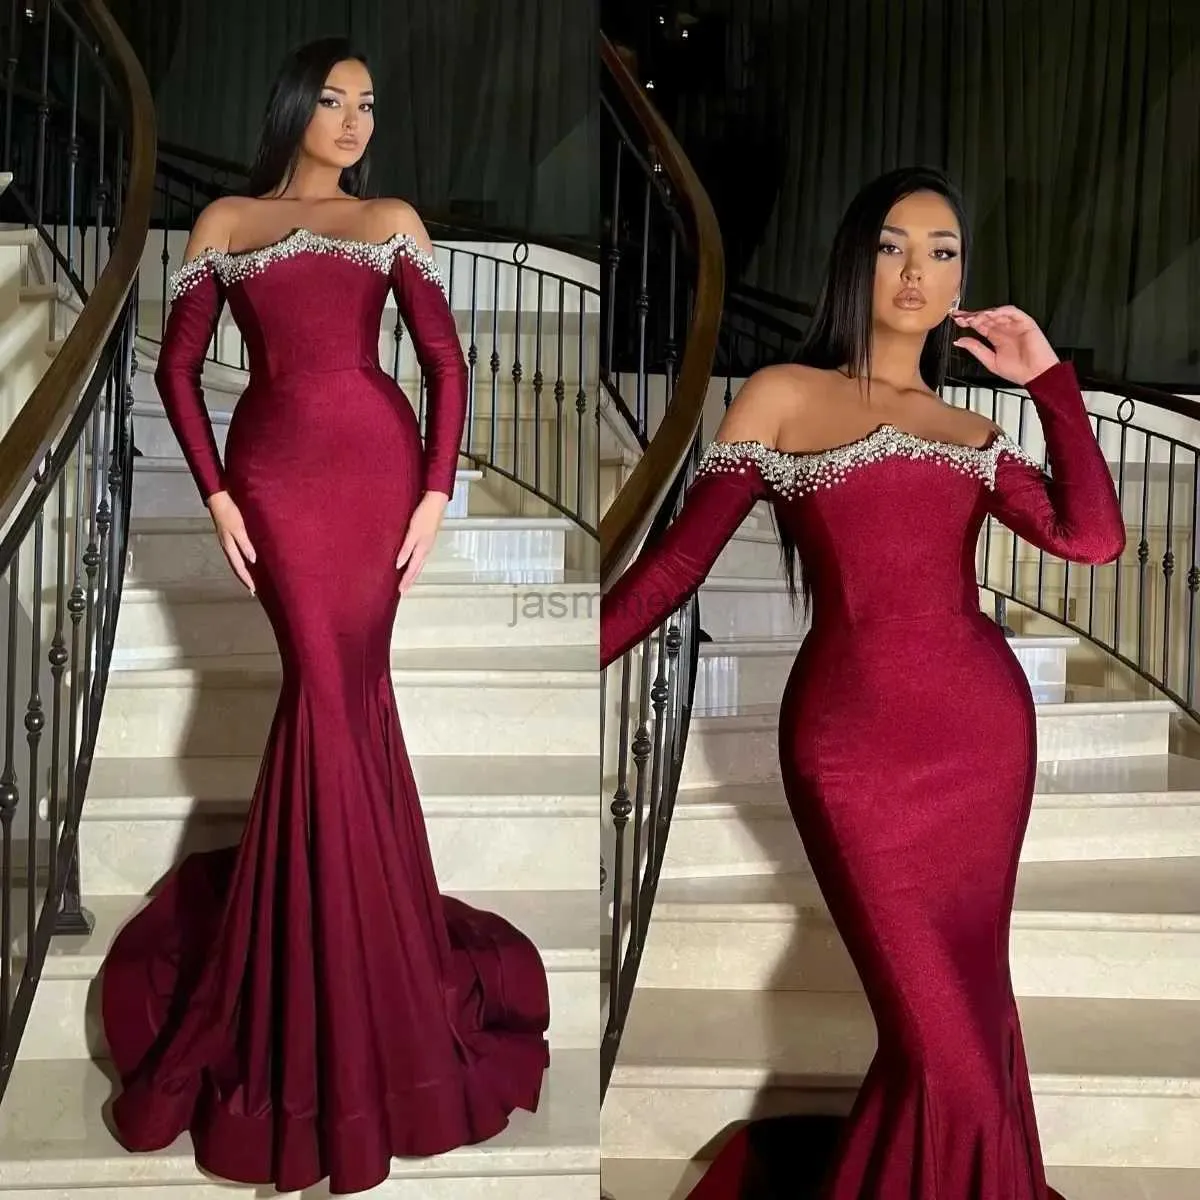 Urban Sexy Dresses Mermaid Prom Dress Crystal Off Shoulder Formal Evening Dresses Elegant Long Sleeves Party For Special Eccesions Promdress 24410